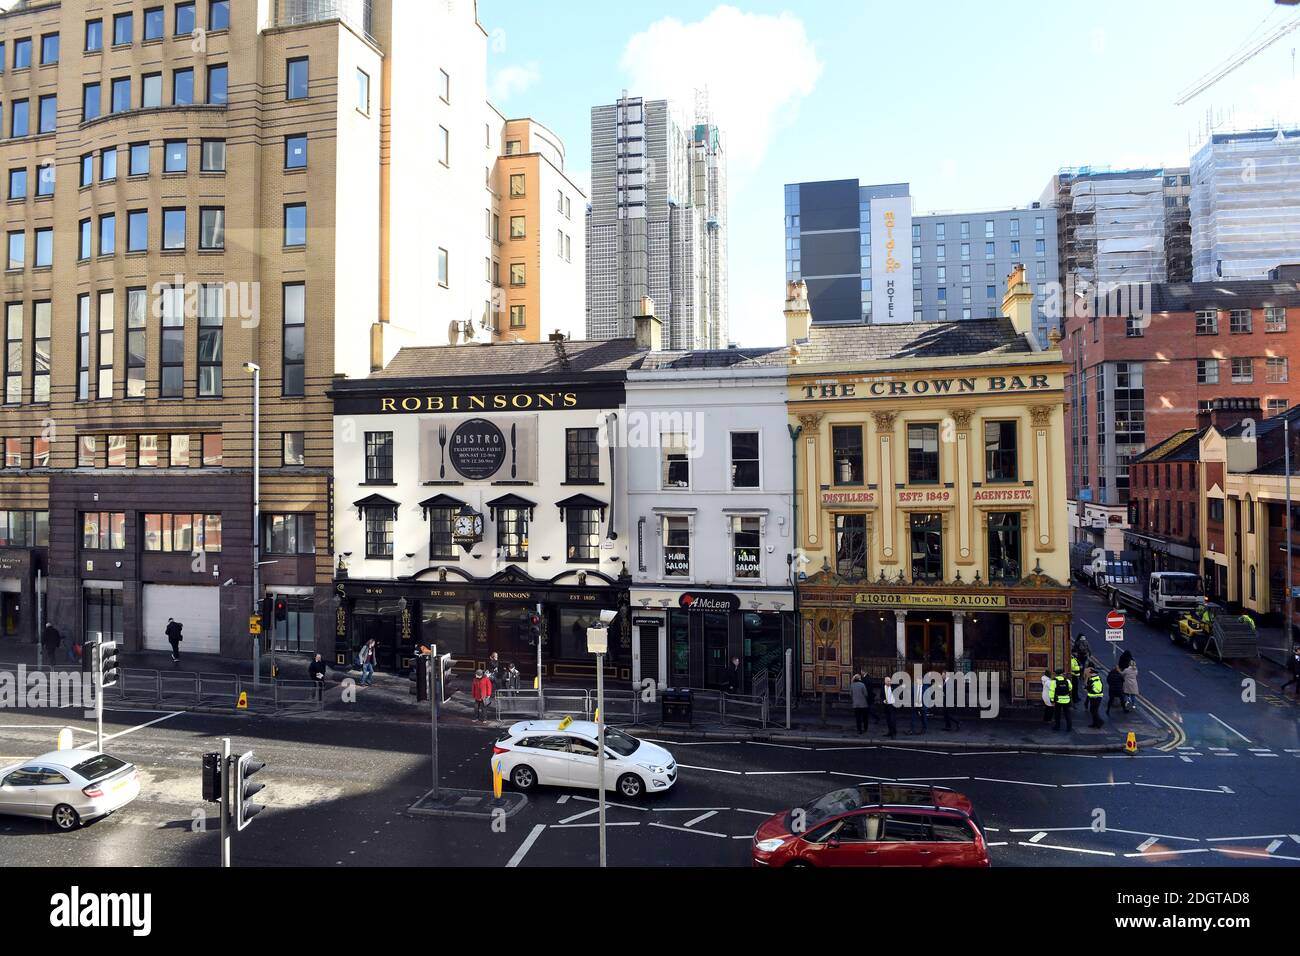 General view of the The Crown Liquor Saloon in Belfast ahead of the royal visit Stock Photo